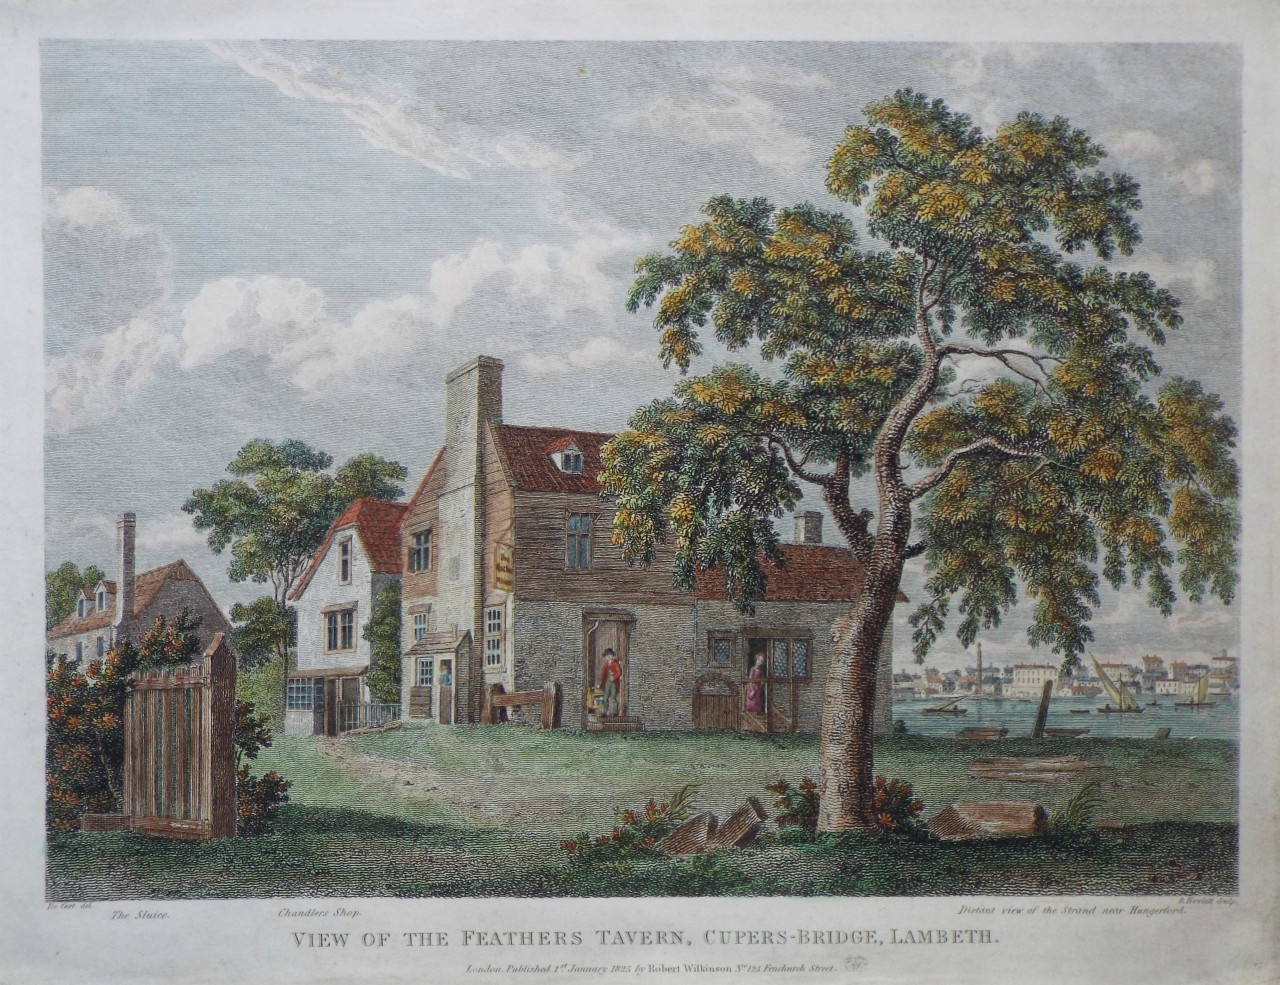 Print - View of the Feathers Tavern, Cupers-Bridge, Lambeth. - Howlett